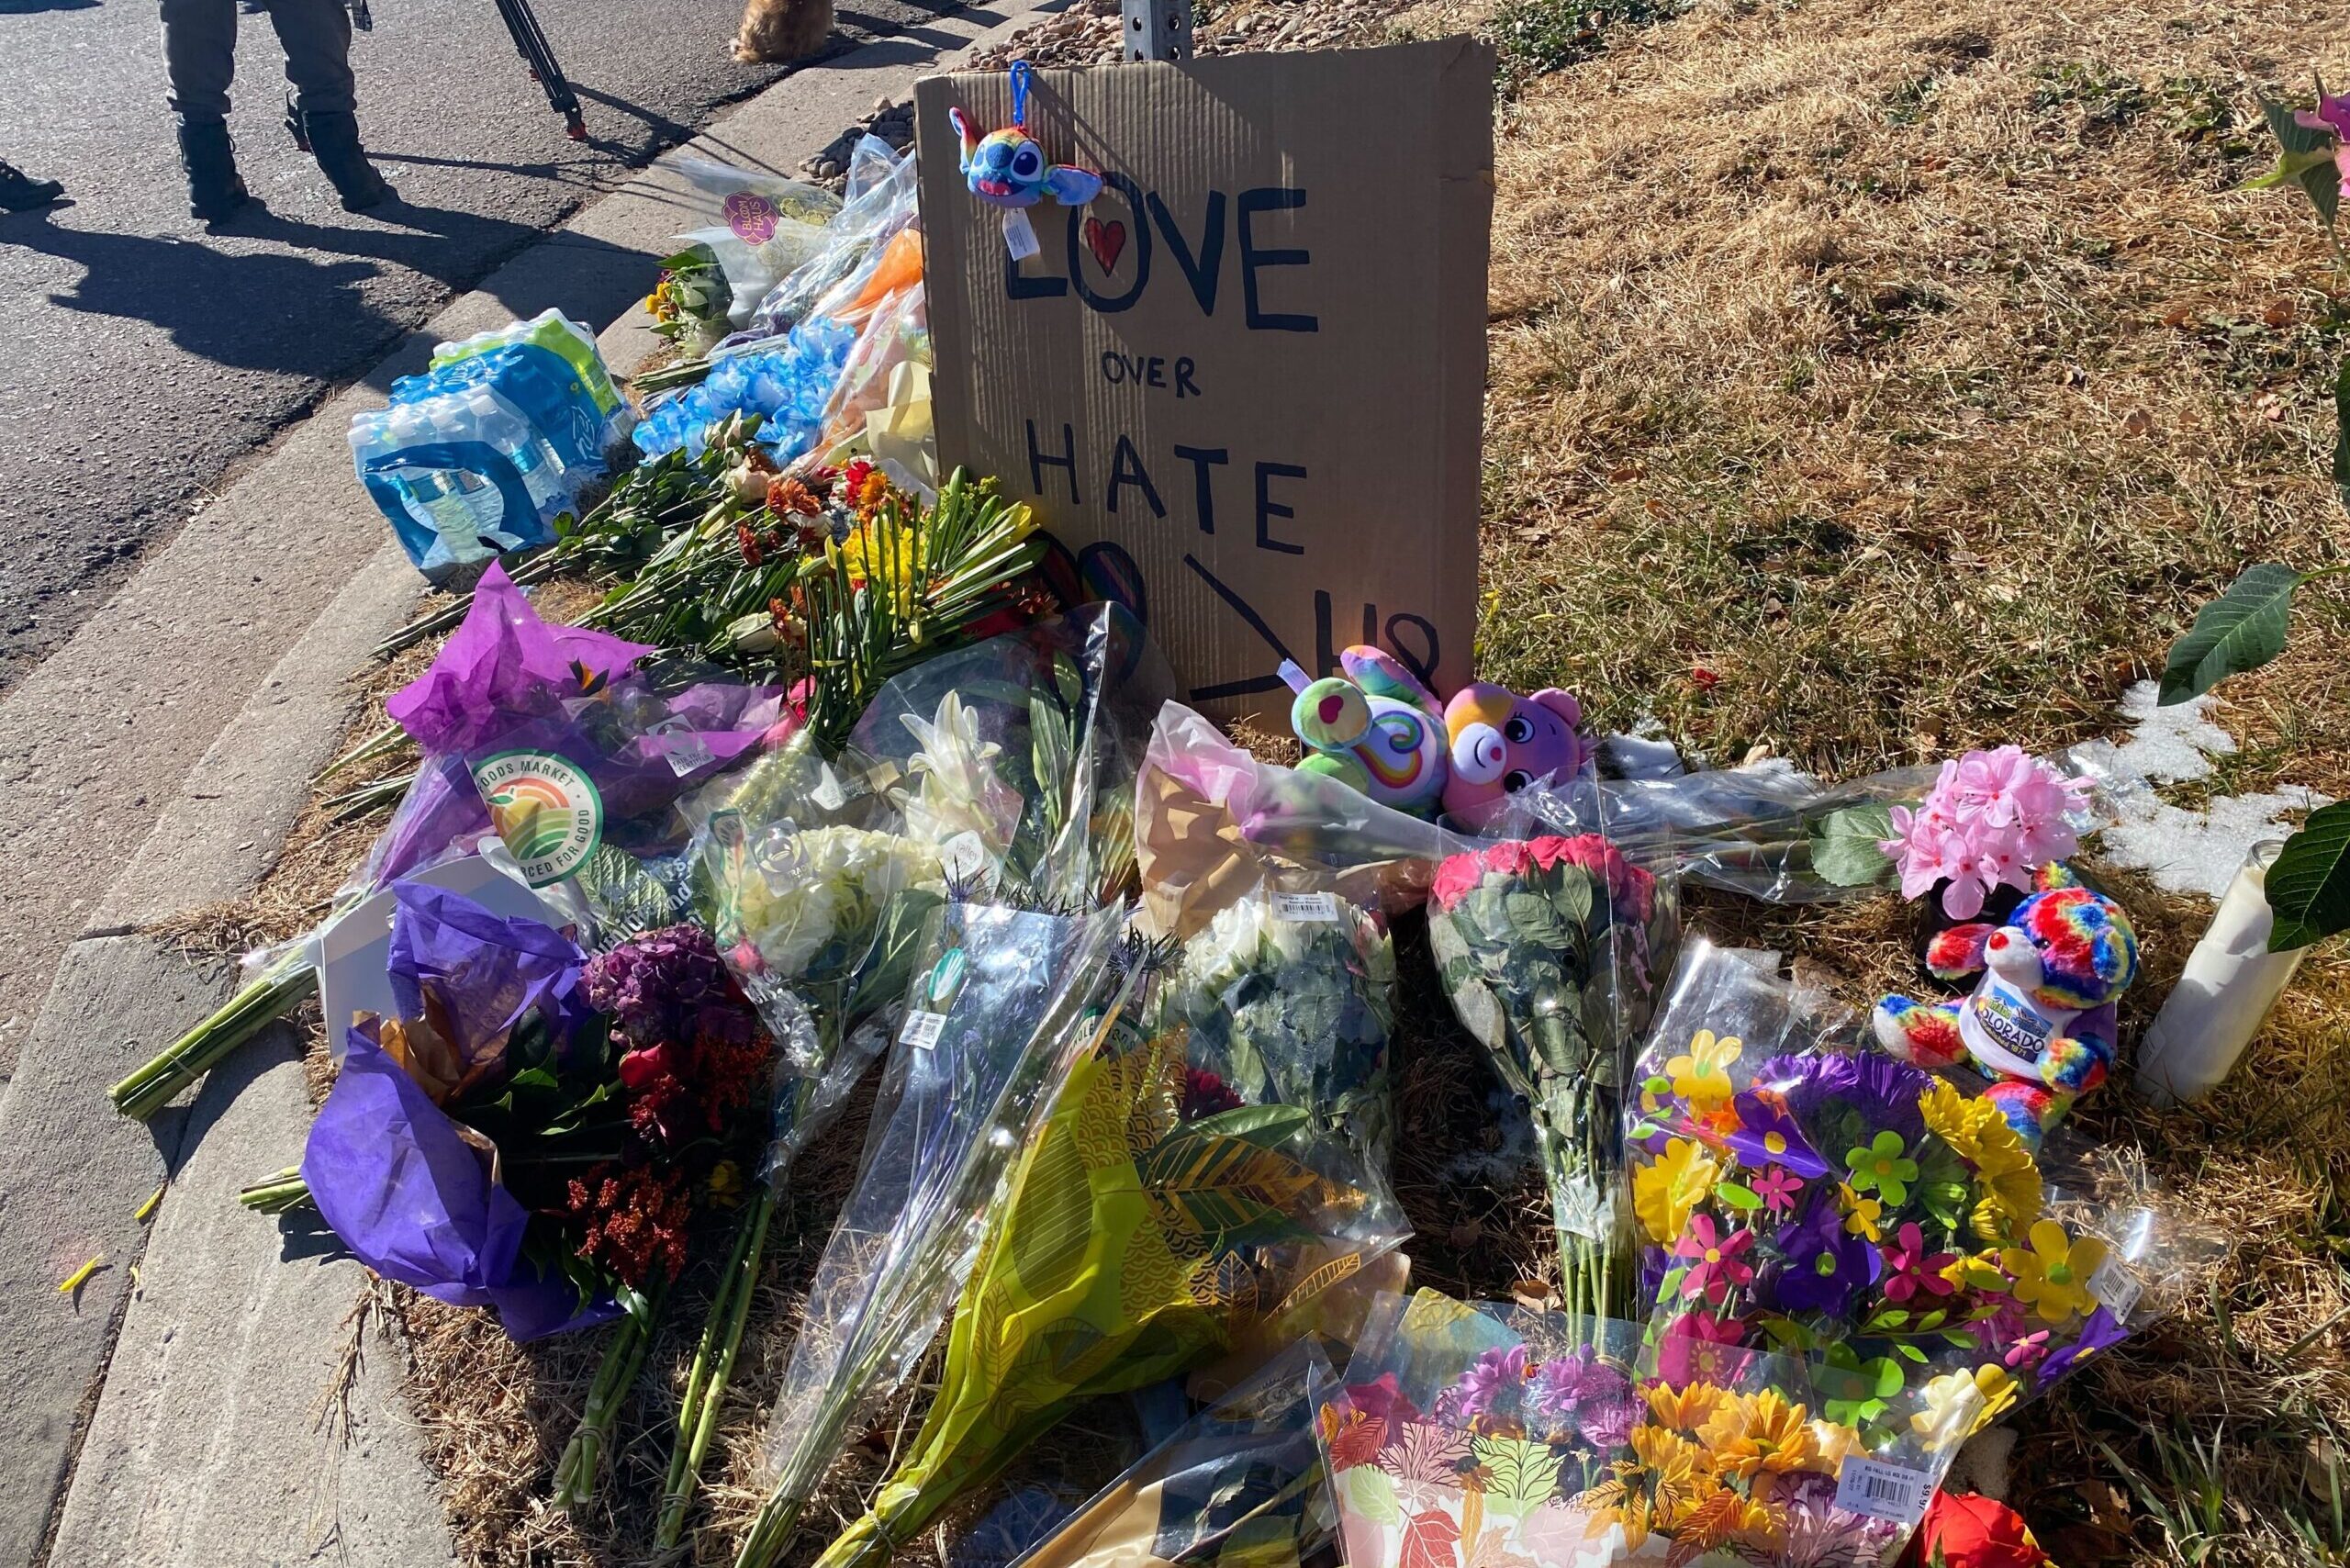 A cardboard sign with the words "Love over hate" sits next to flowers.